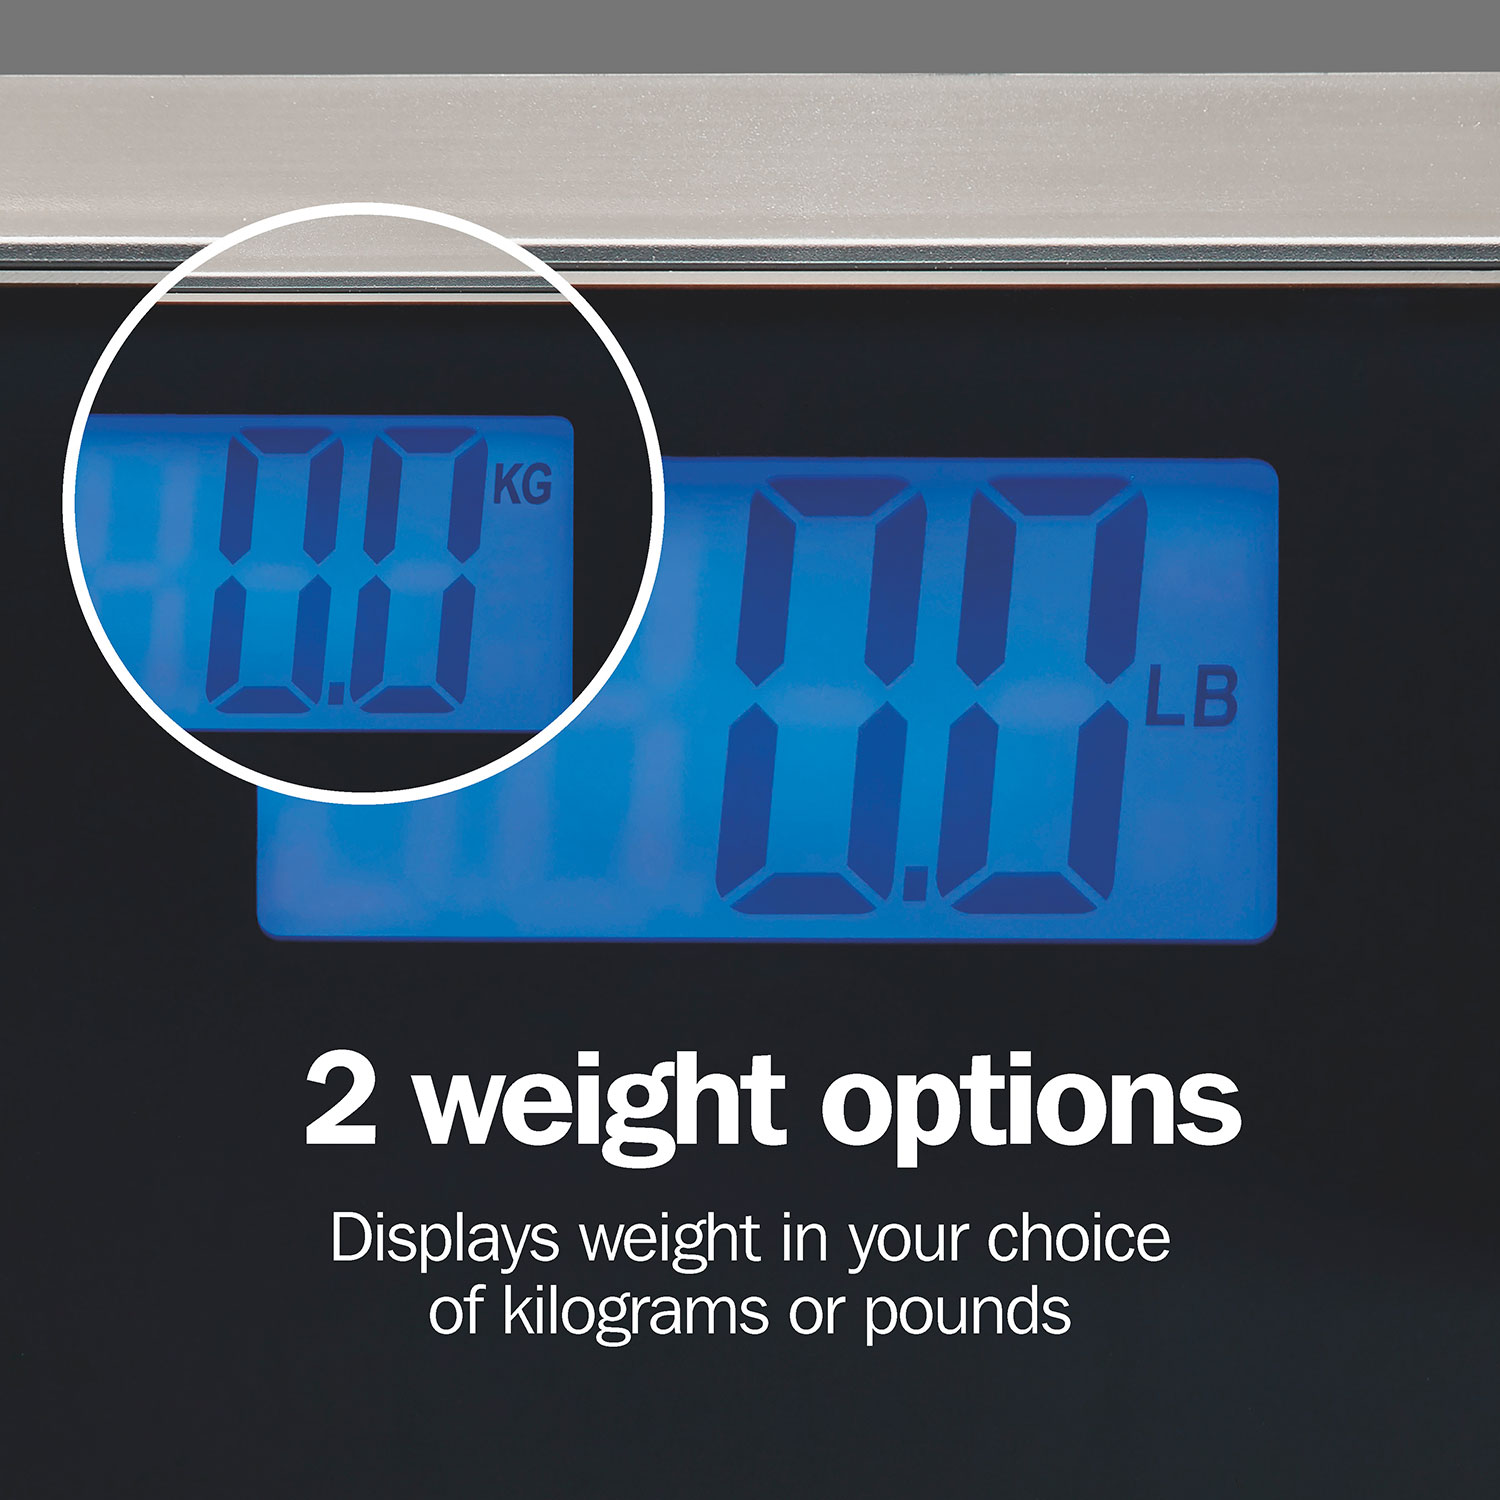 Weighty decision: How to choose the right bathroom scale - The